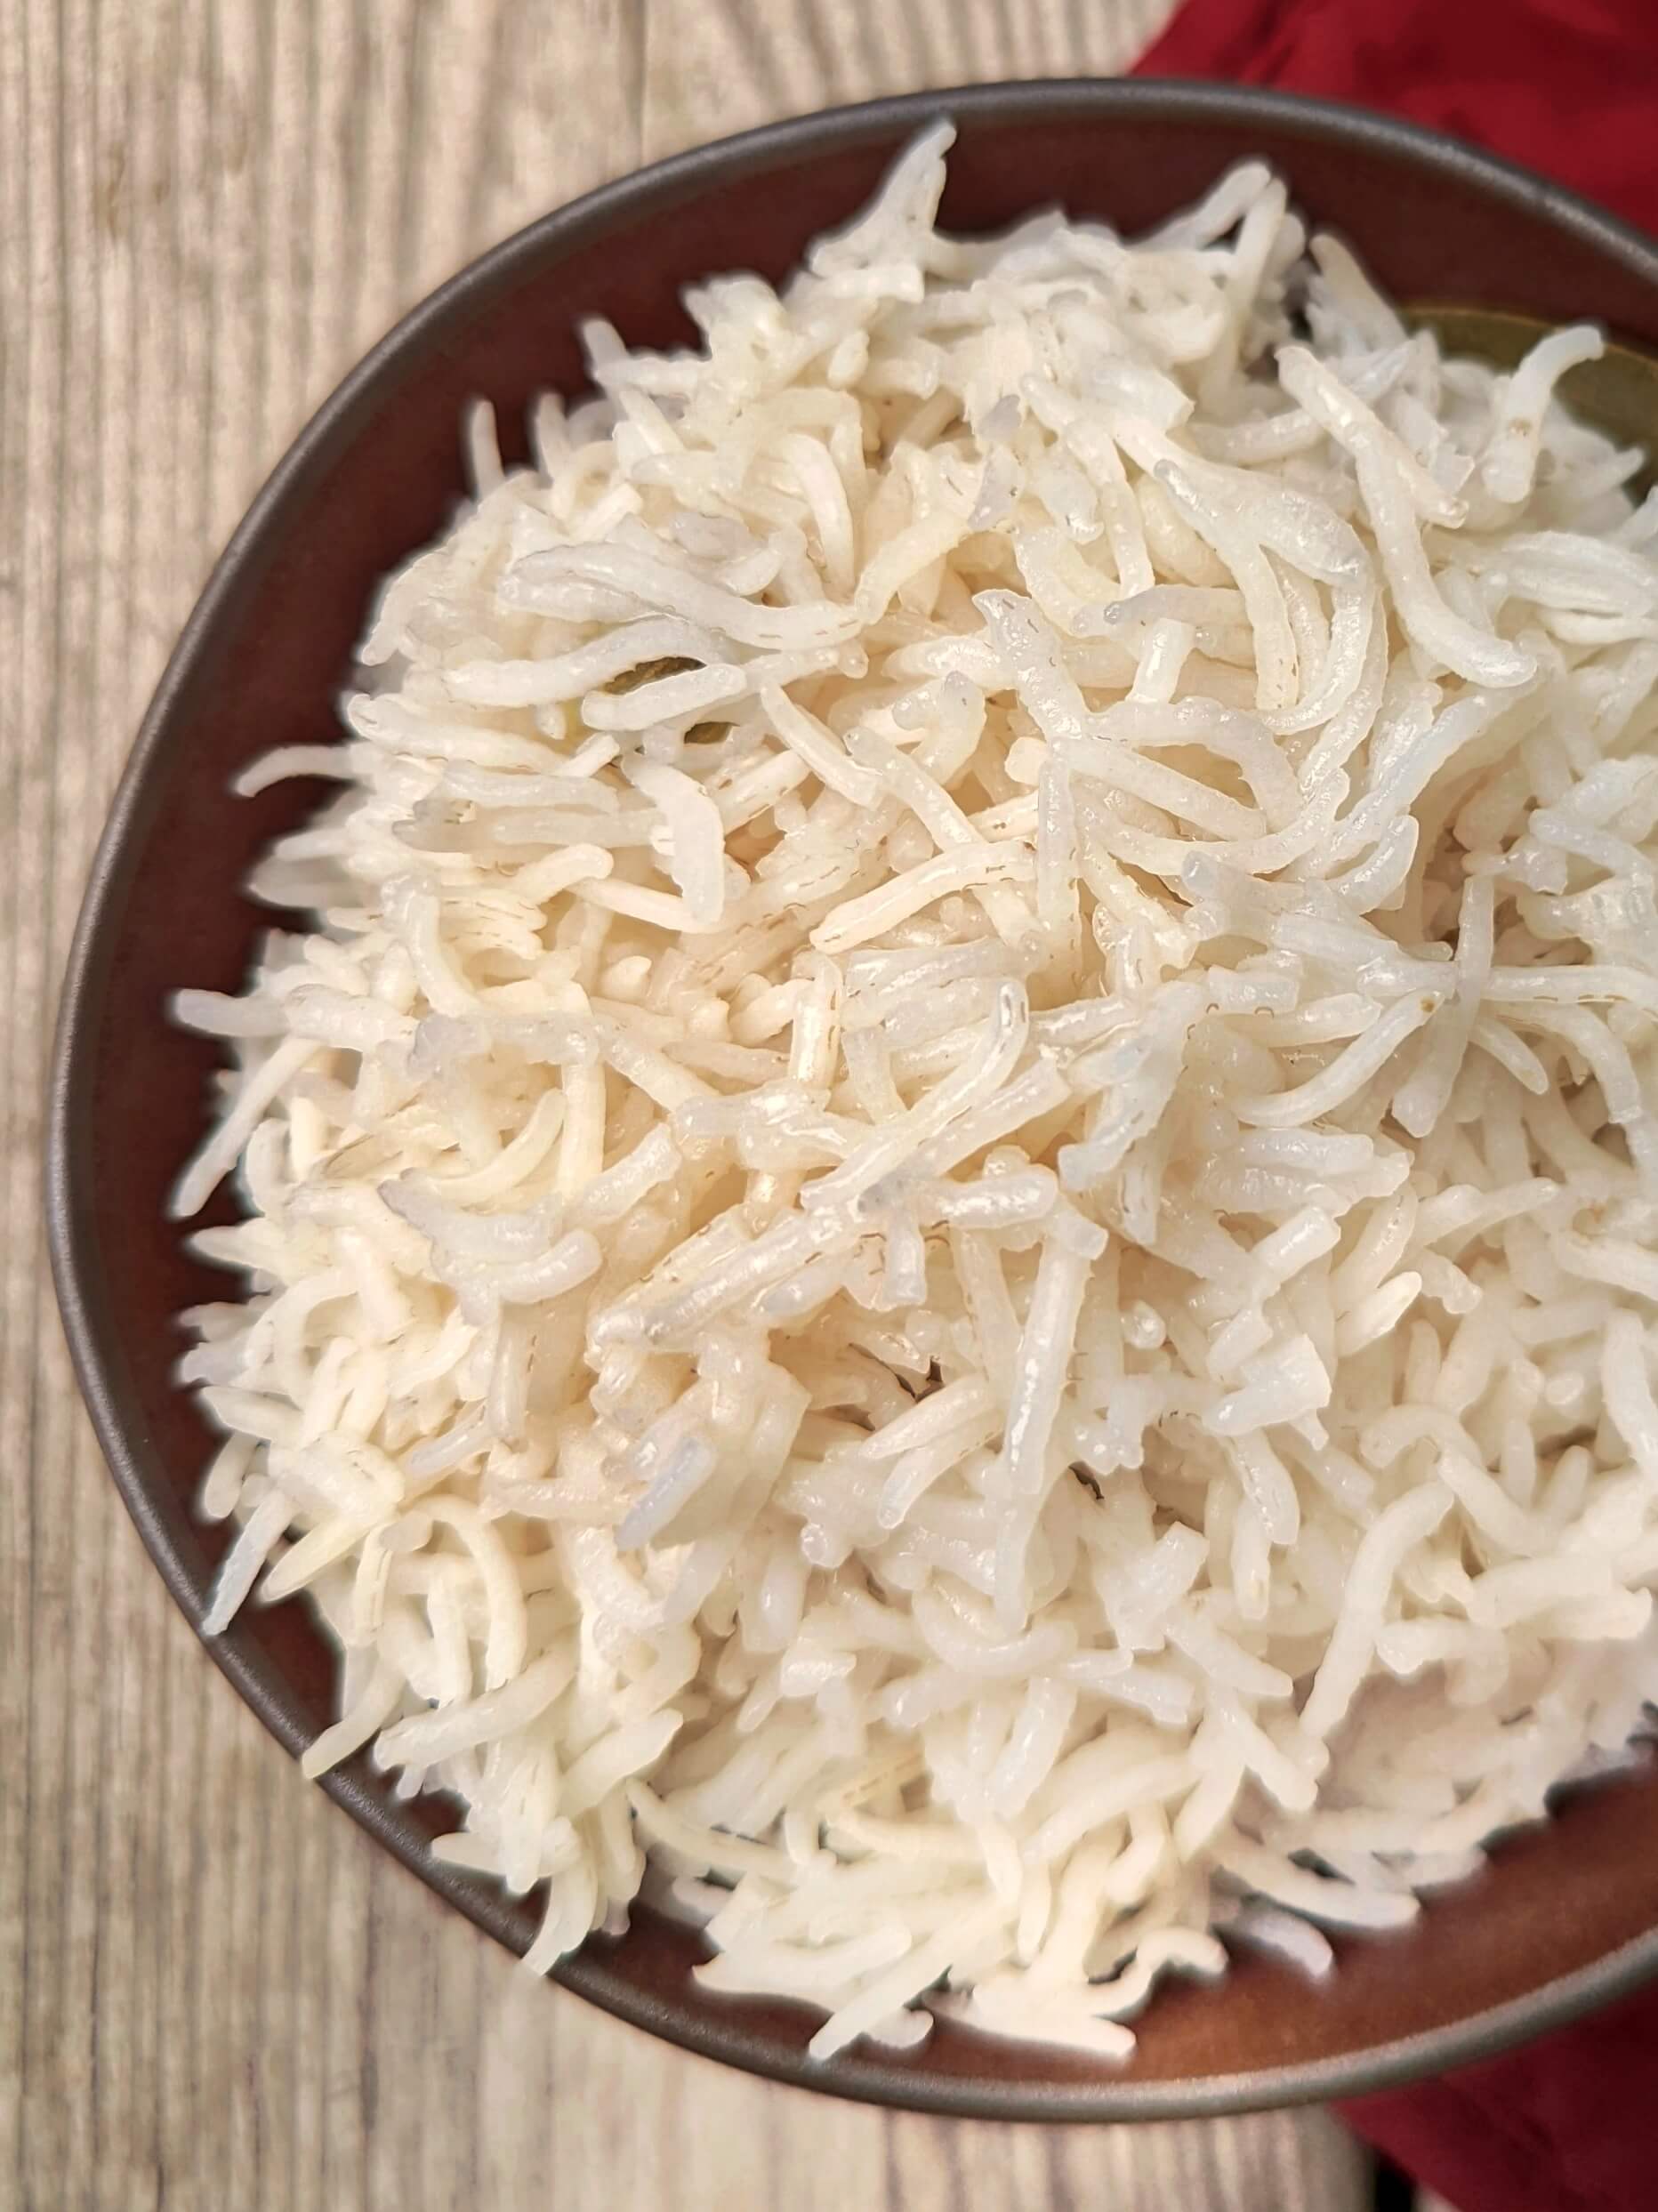 A close up of basmati rice in a bowl.